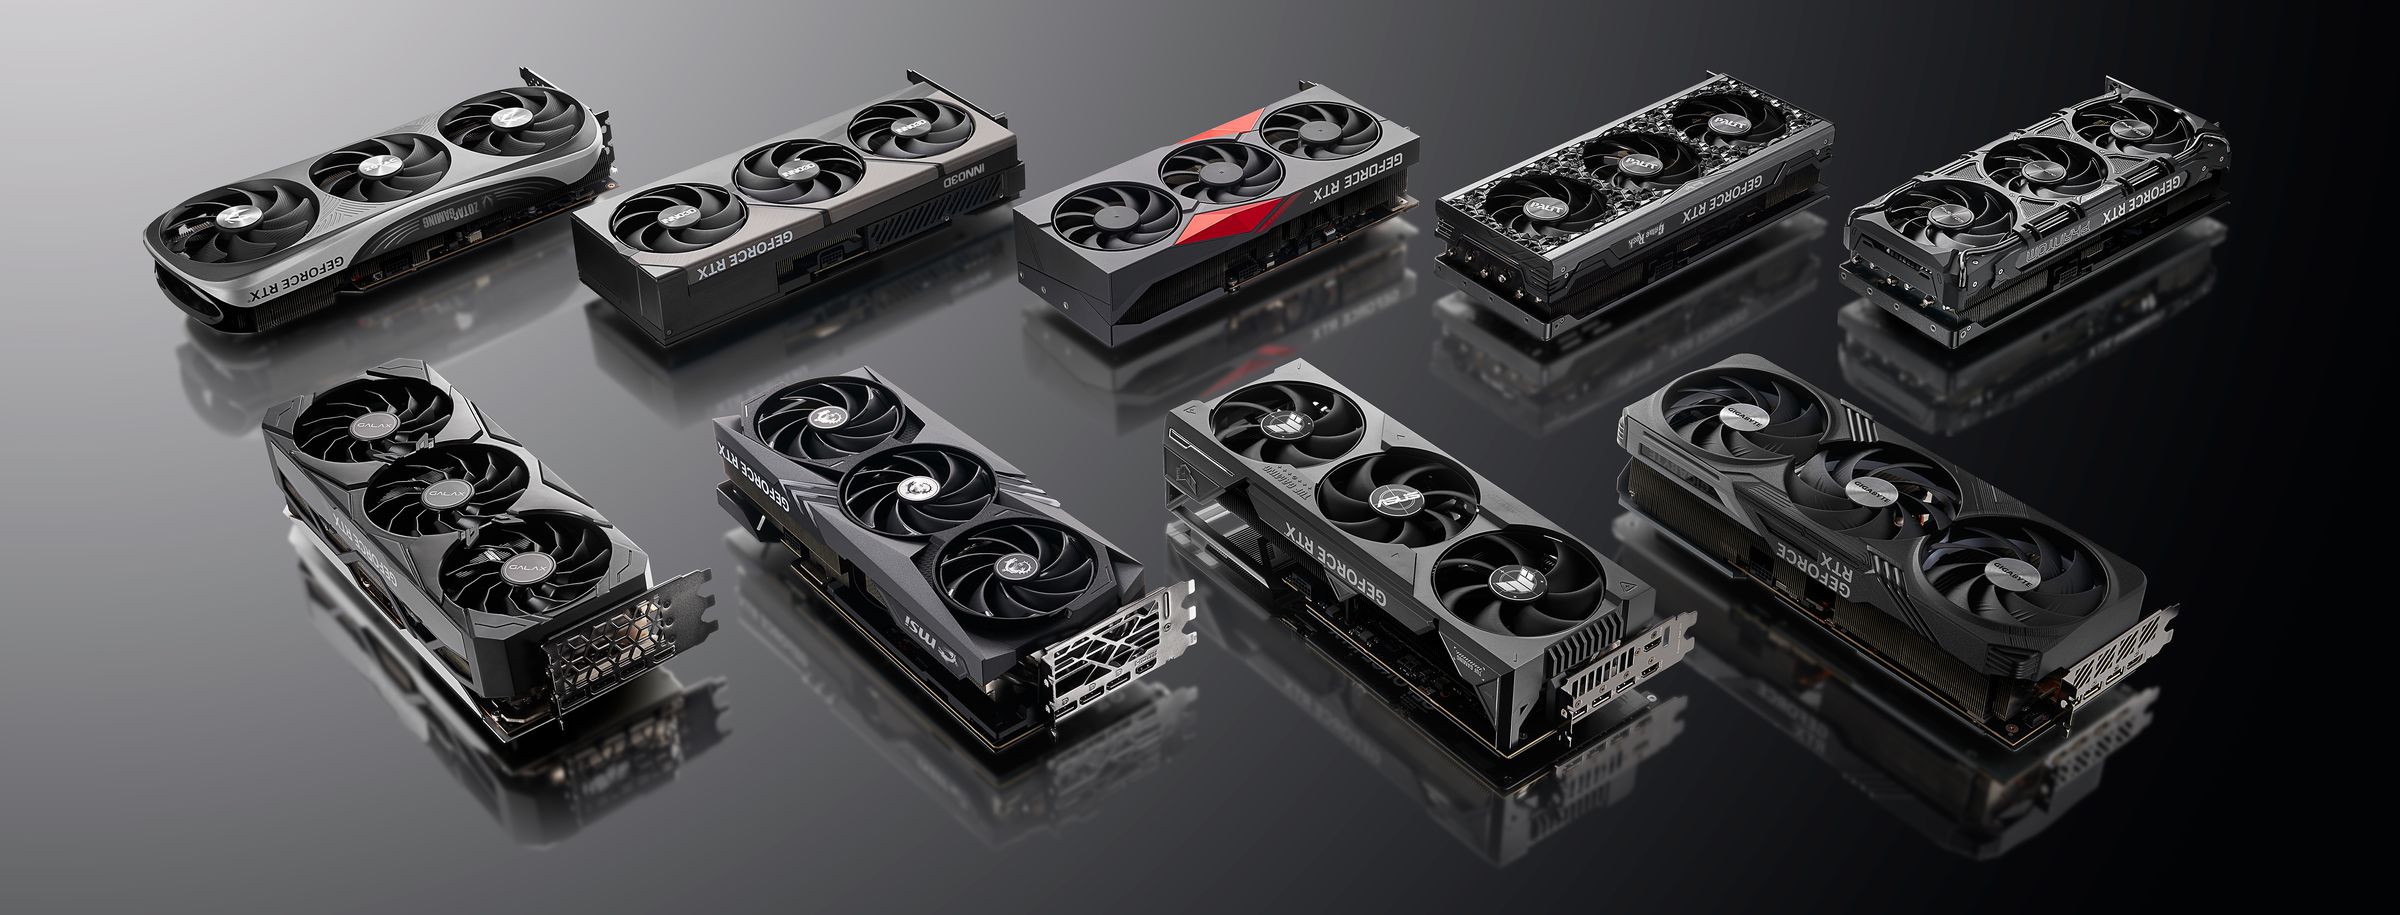 RTX 40-series GPUs from partners.